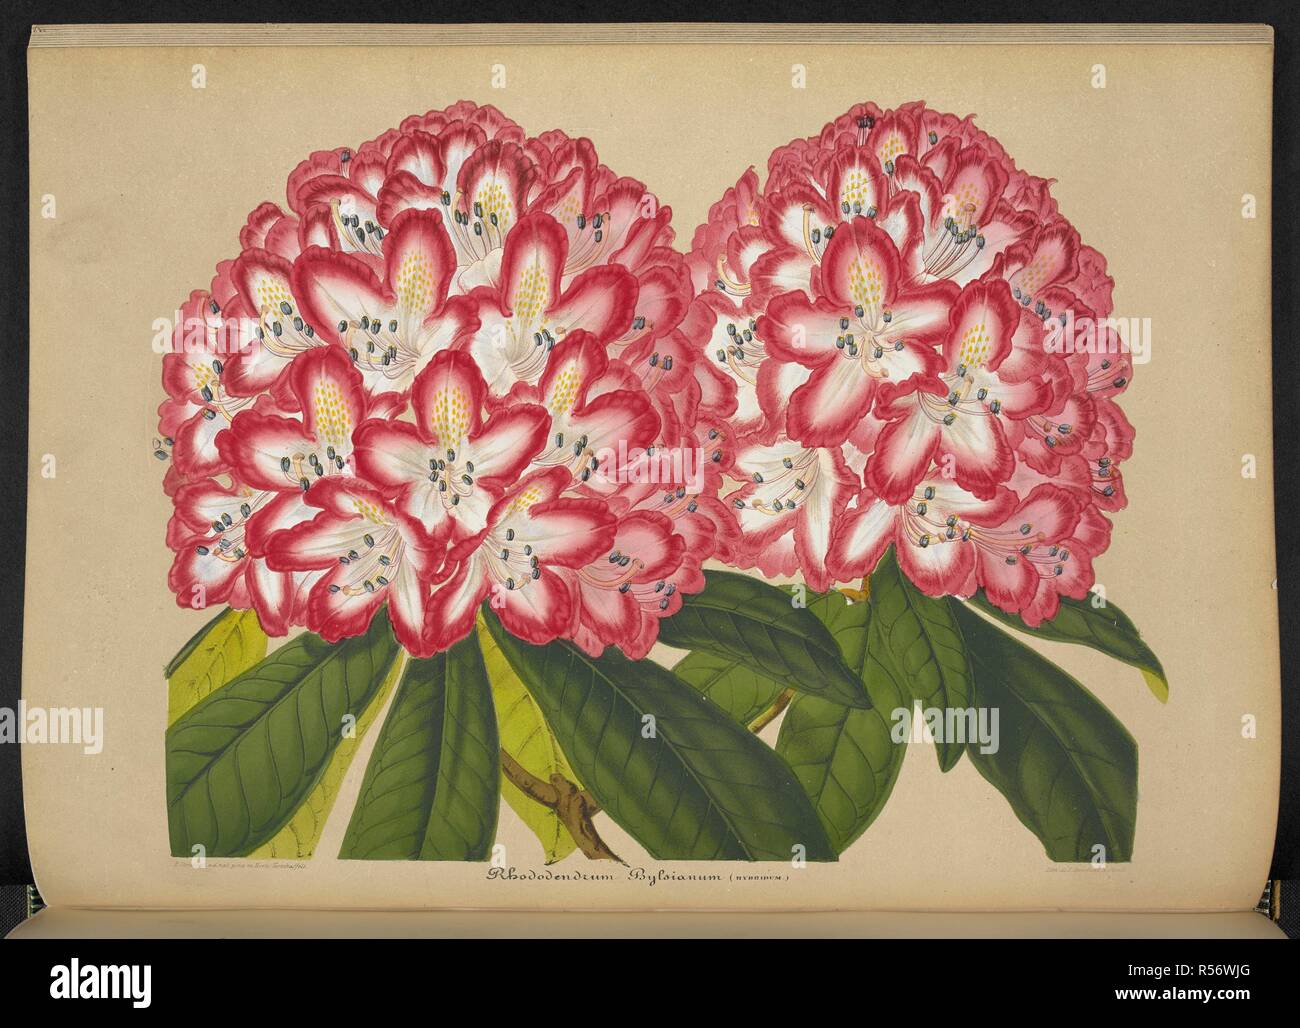 Rhododendron bylsianum. Rhododendron Bylsianum (hybridum). The Illustrated Bouquet, consisting of figures, with descriptions of new flowers. London, 1857-64. Source: 1823.c.13 plate 18. Author: Henderson, Edward George. Stroobant, P. Stock Photo